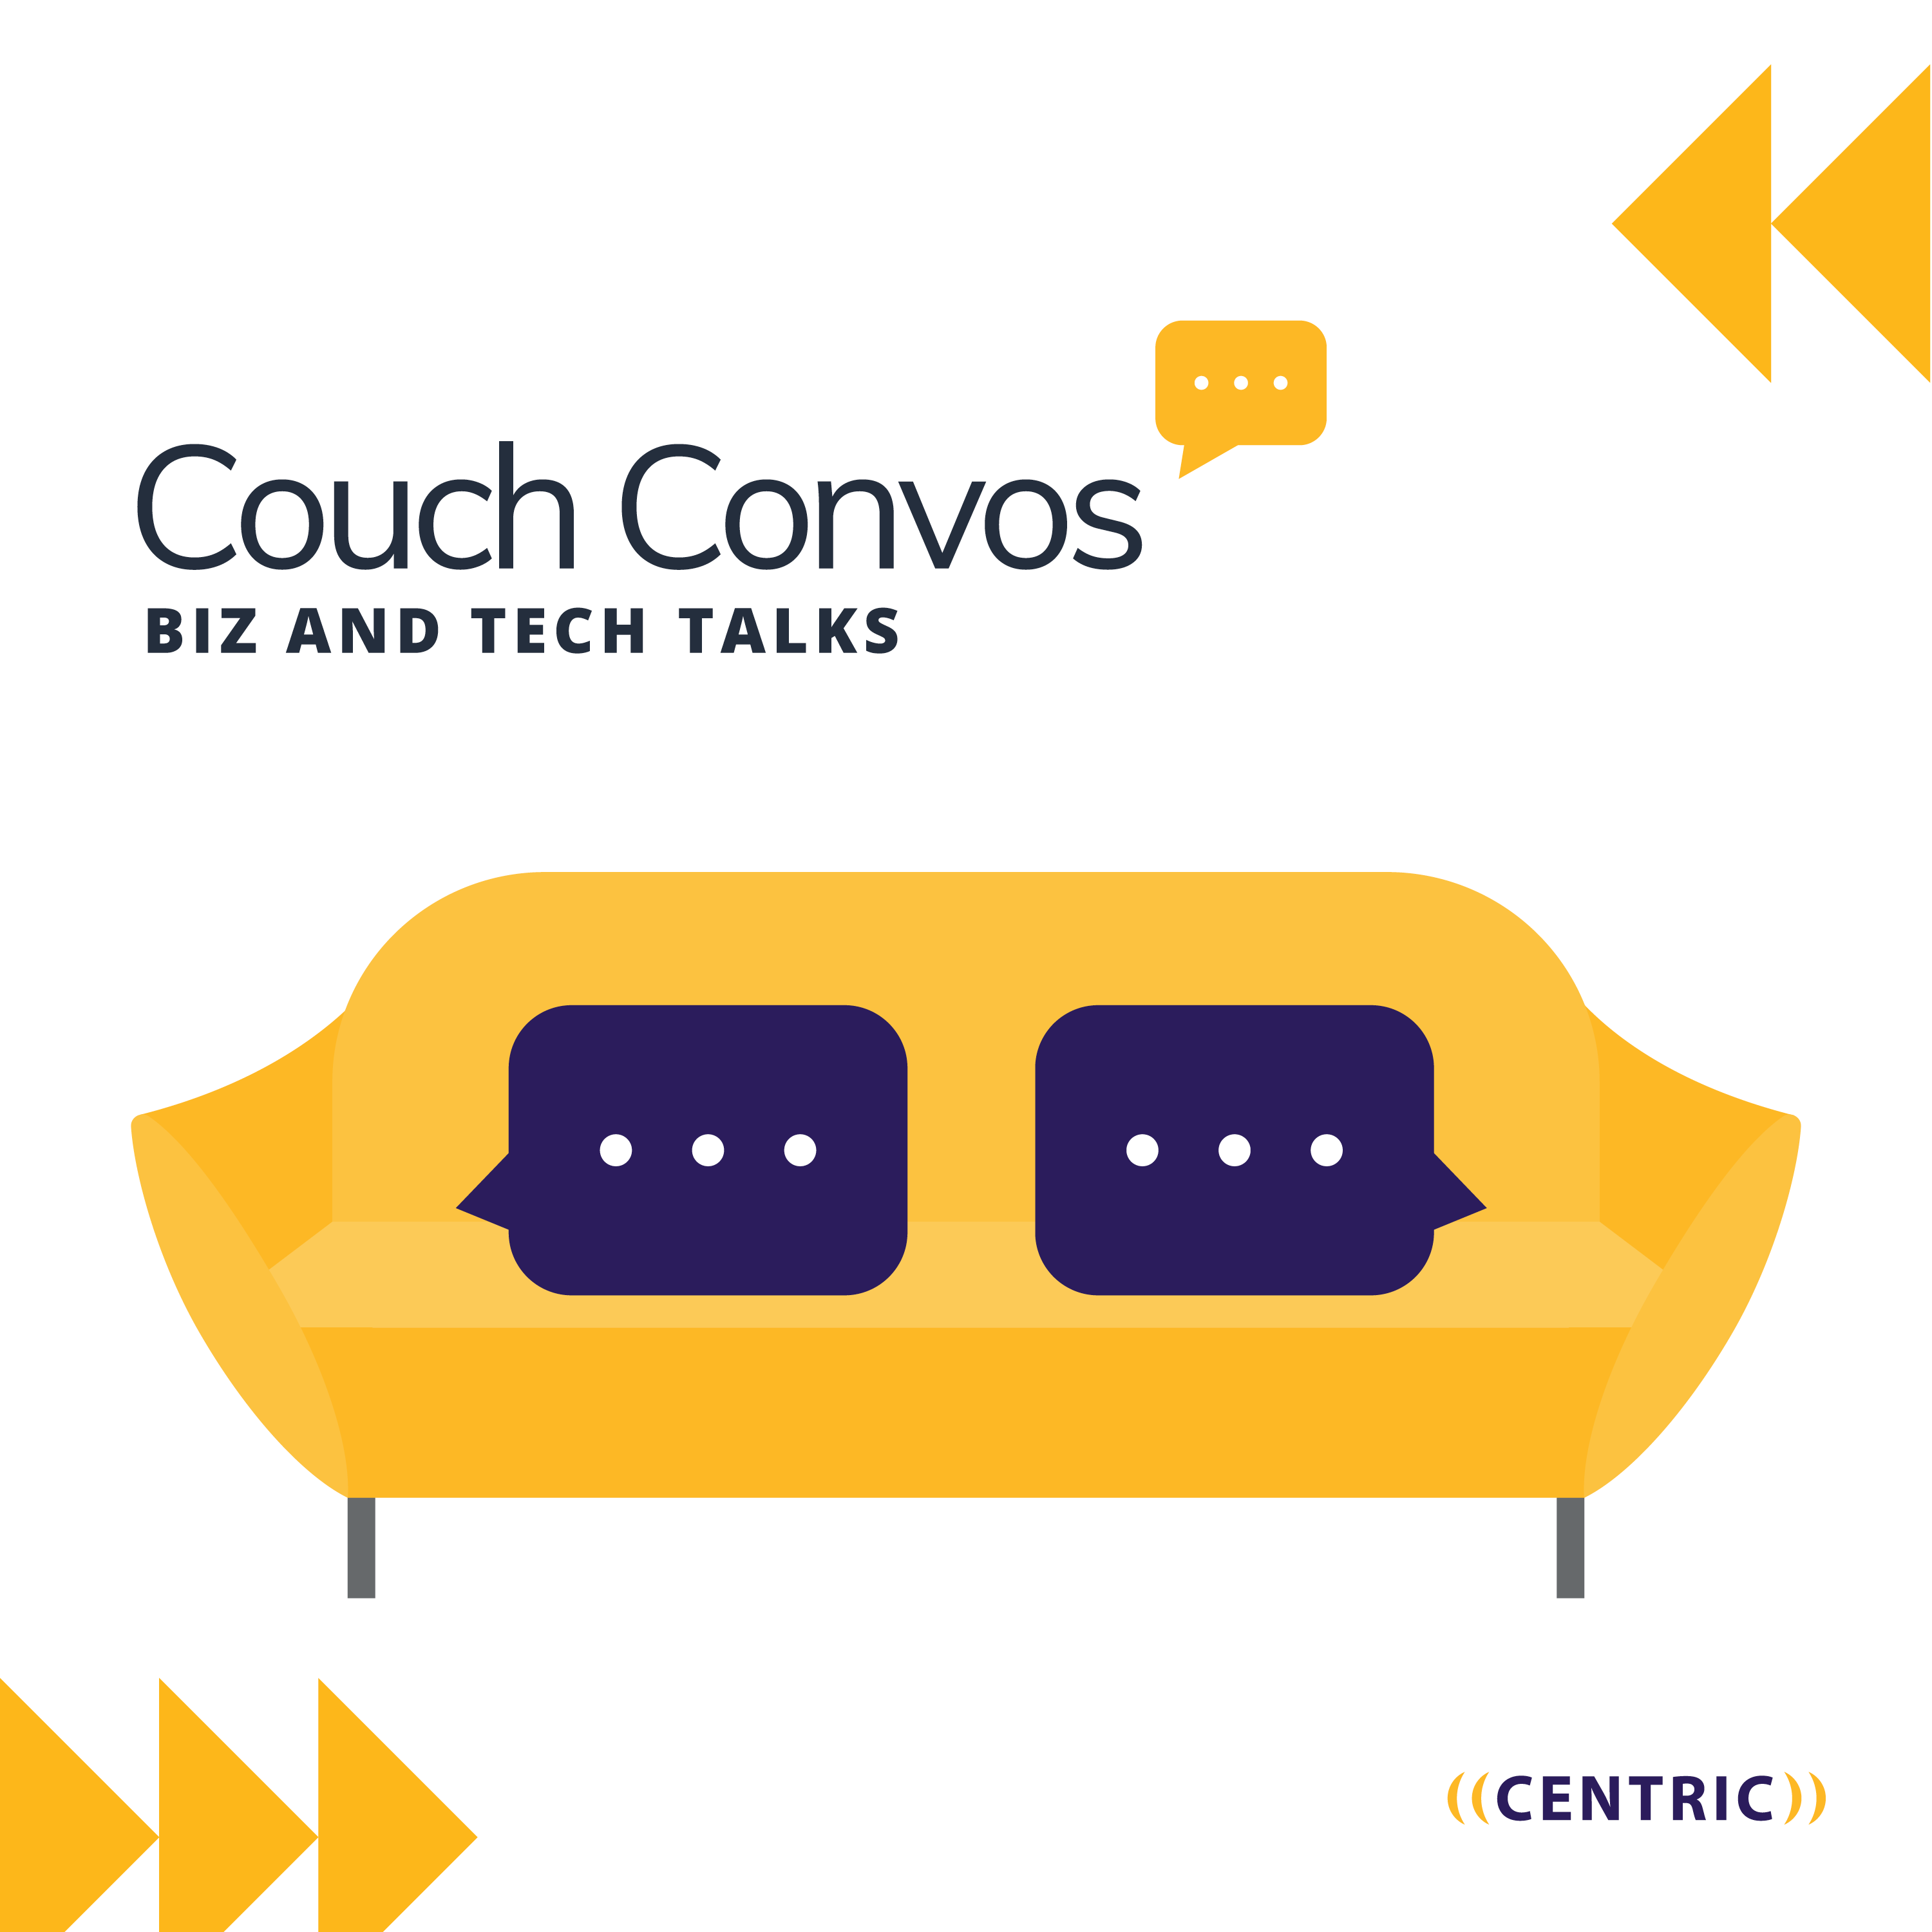 Couch Convos: Centric Commemorates Celebrating Juneteenth